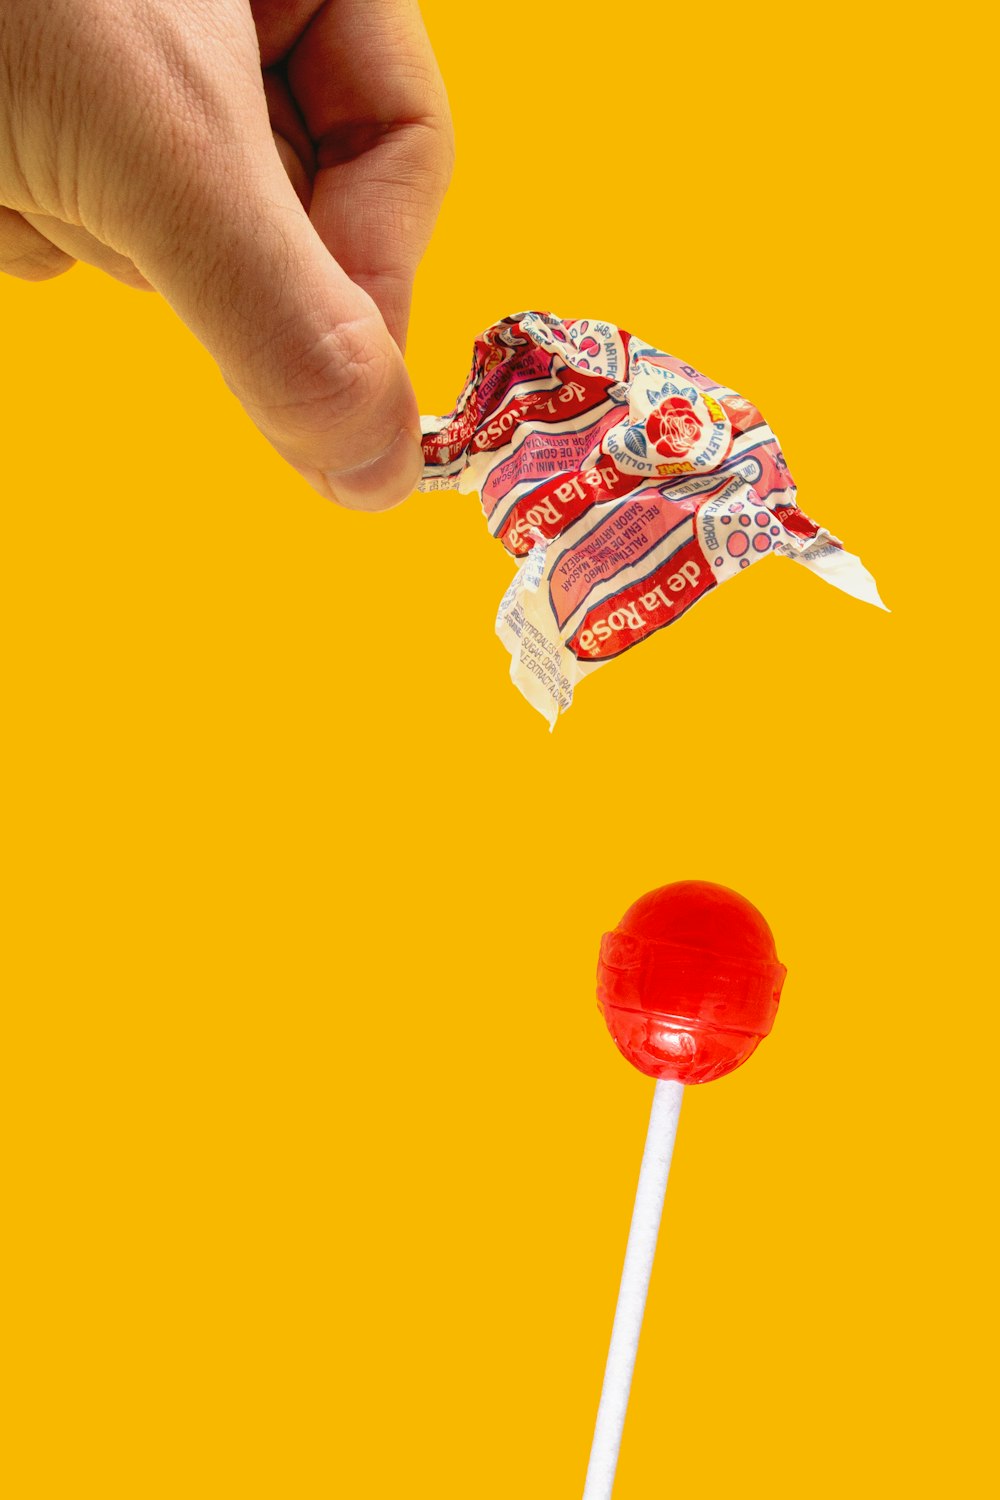 person holding red lollipop with blue and white candy wrapper